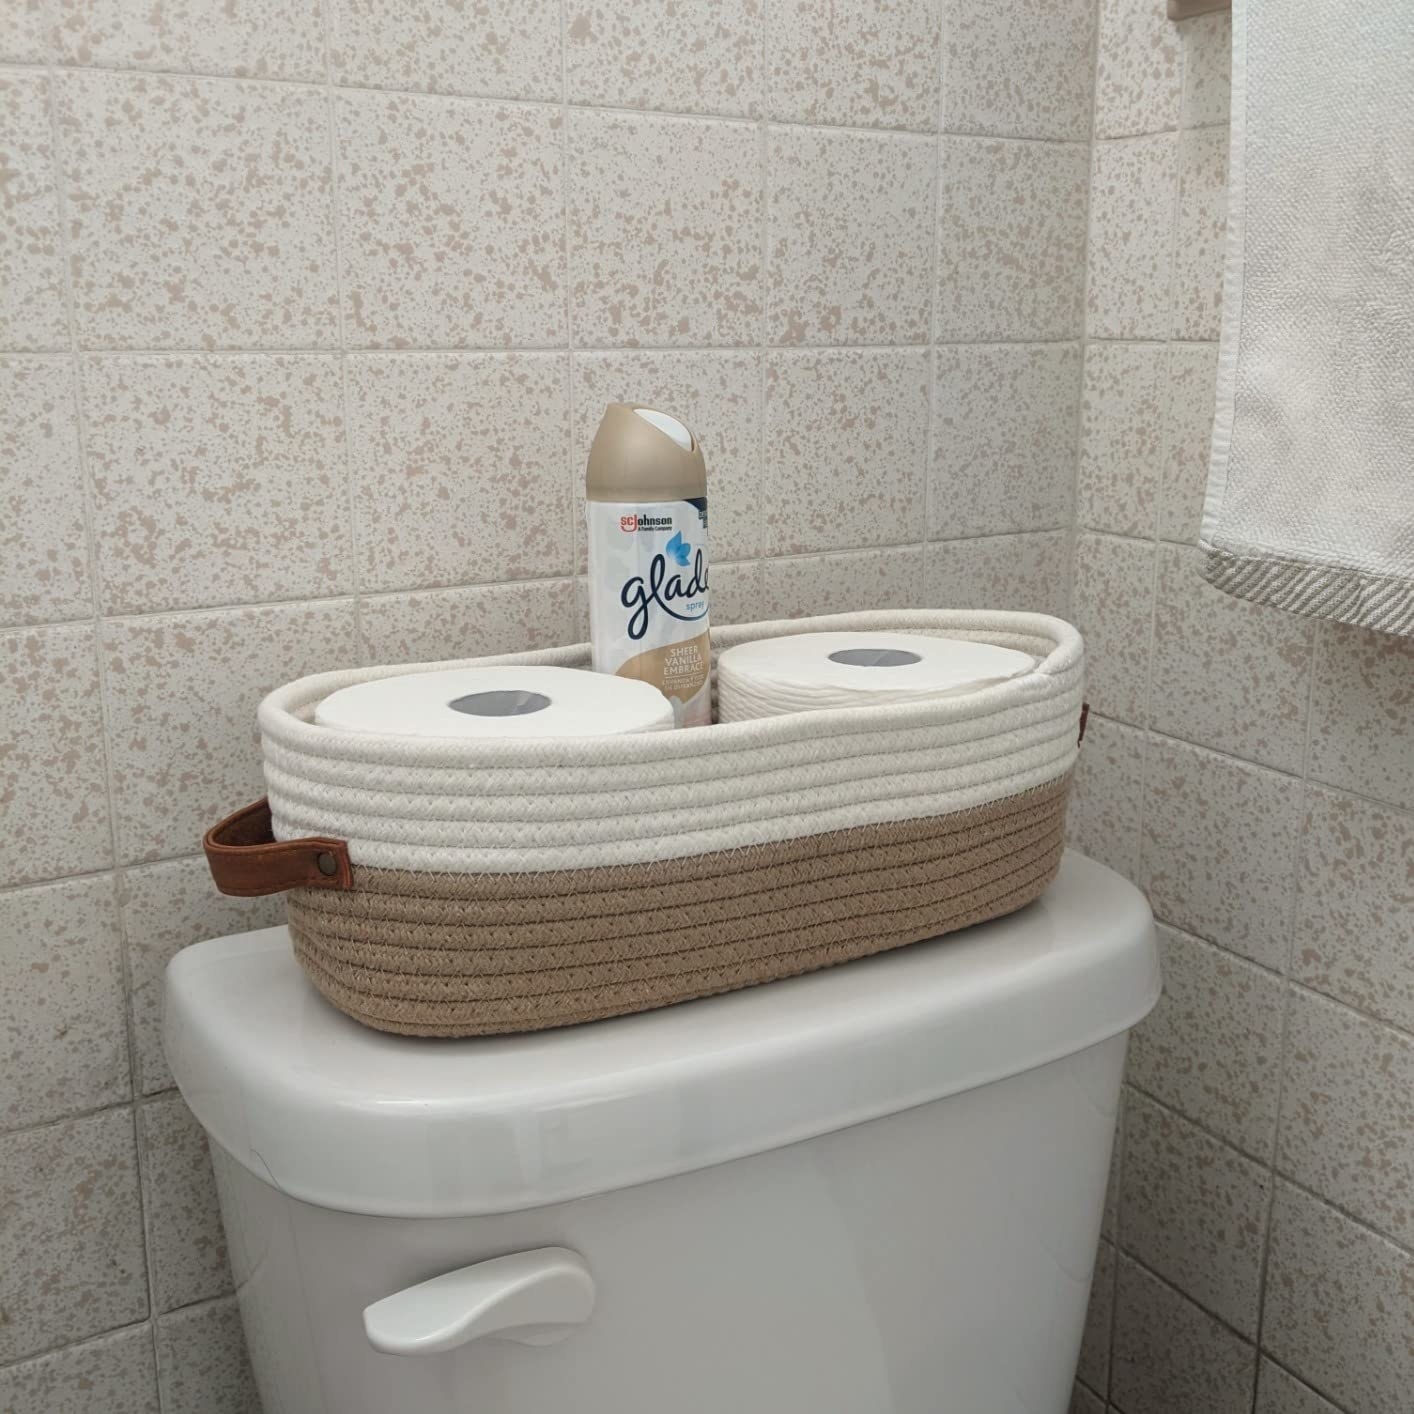 the woven basket with toilet paper and an air freshener on top of a toilet tank